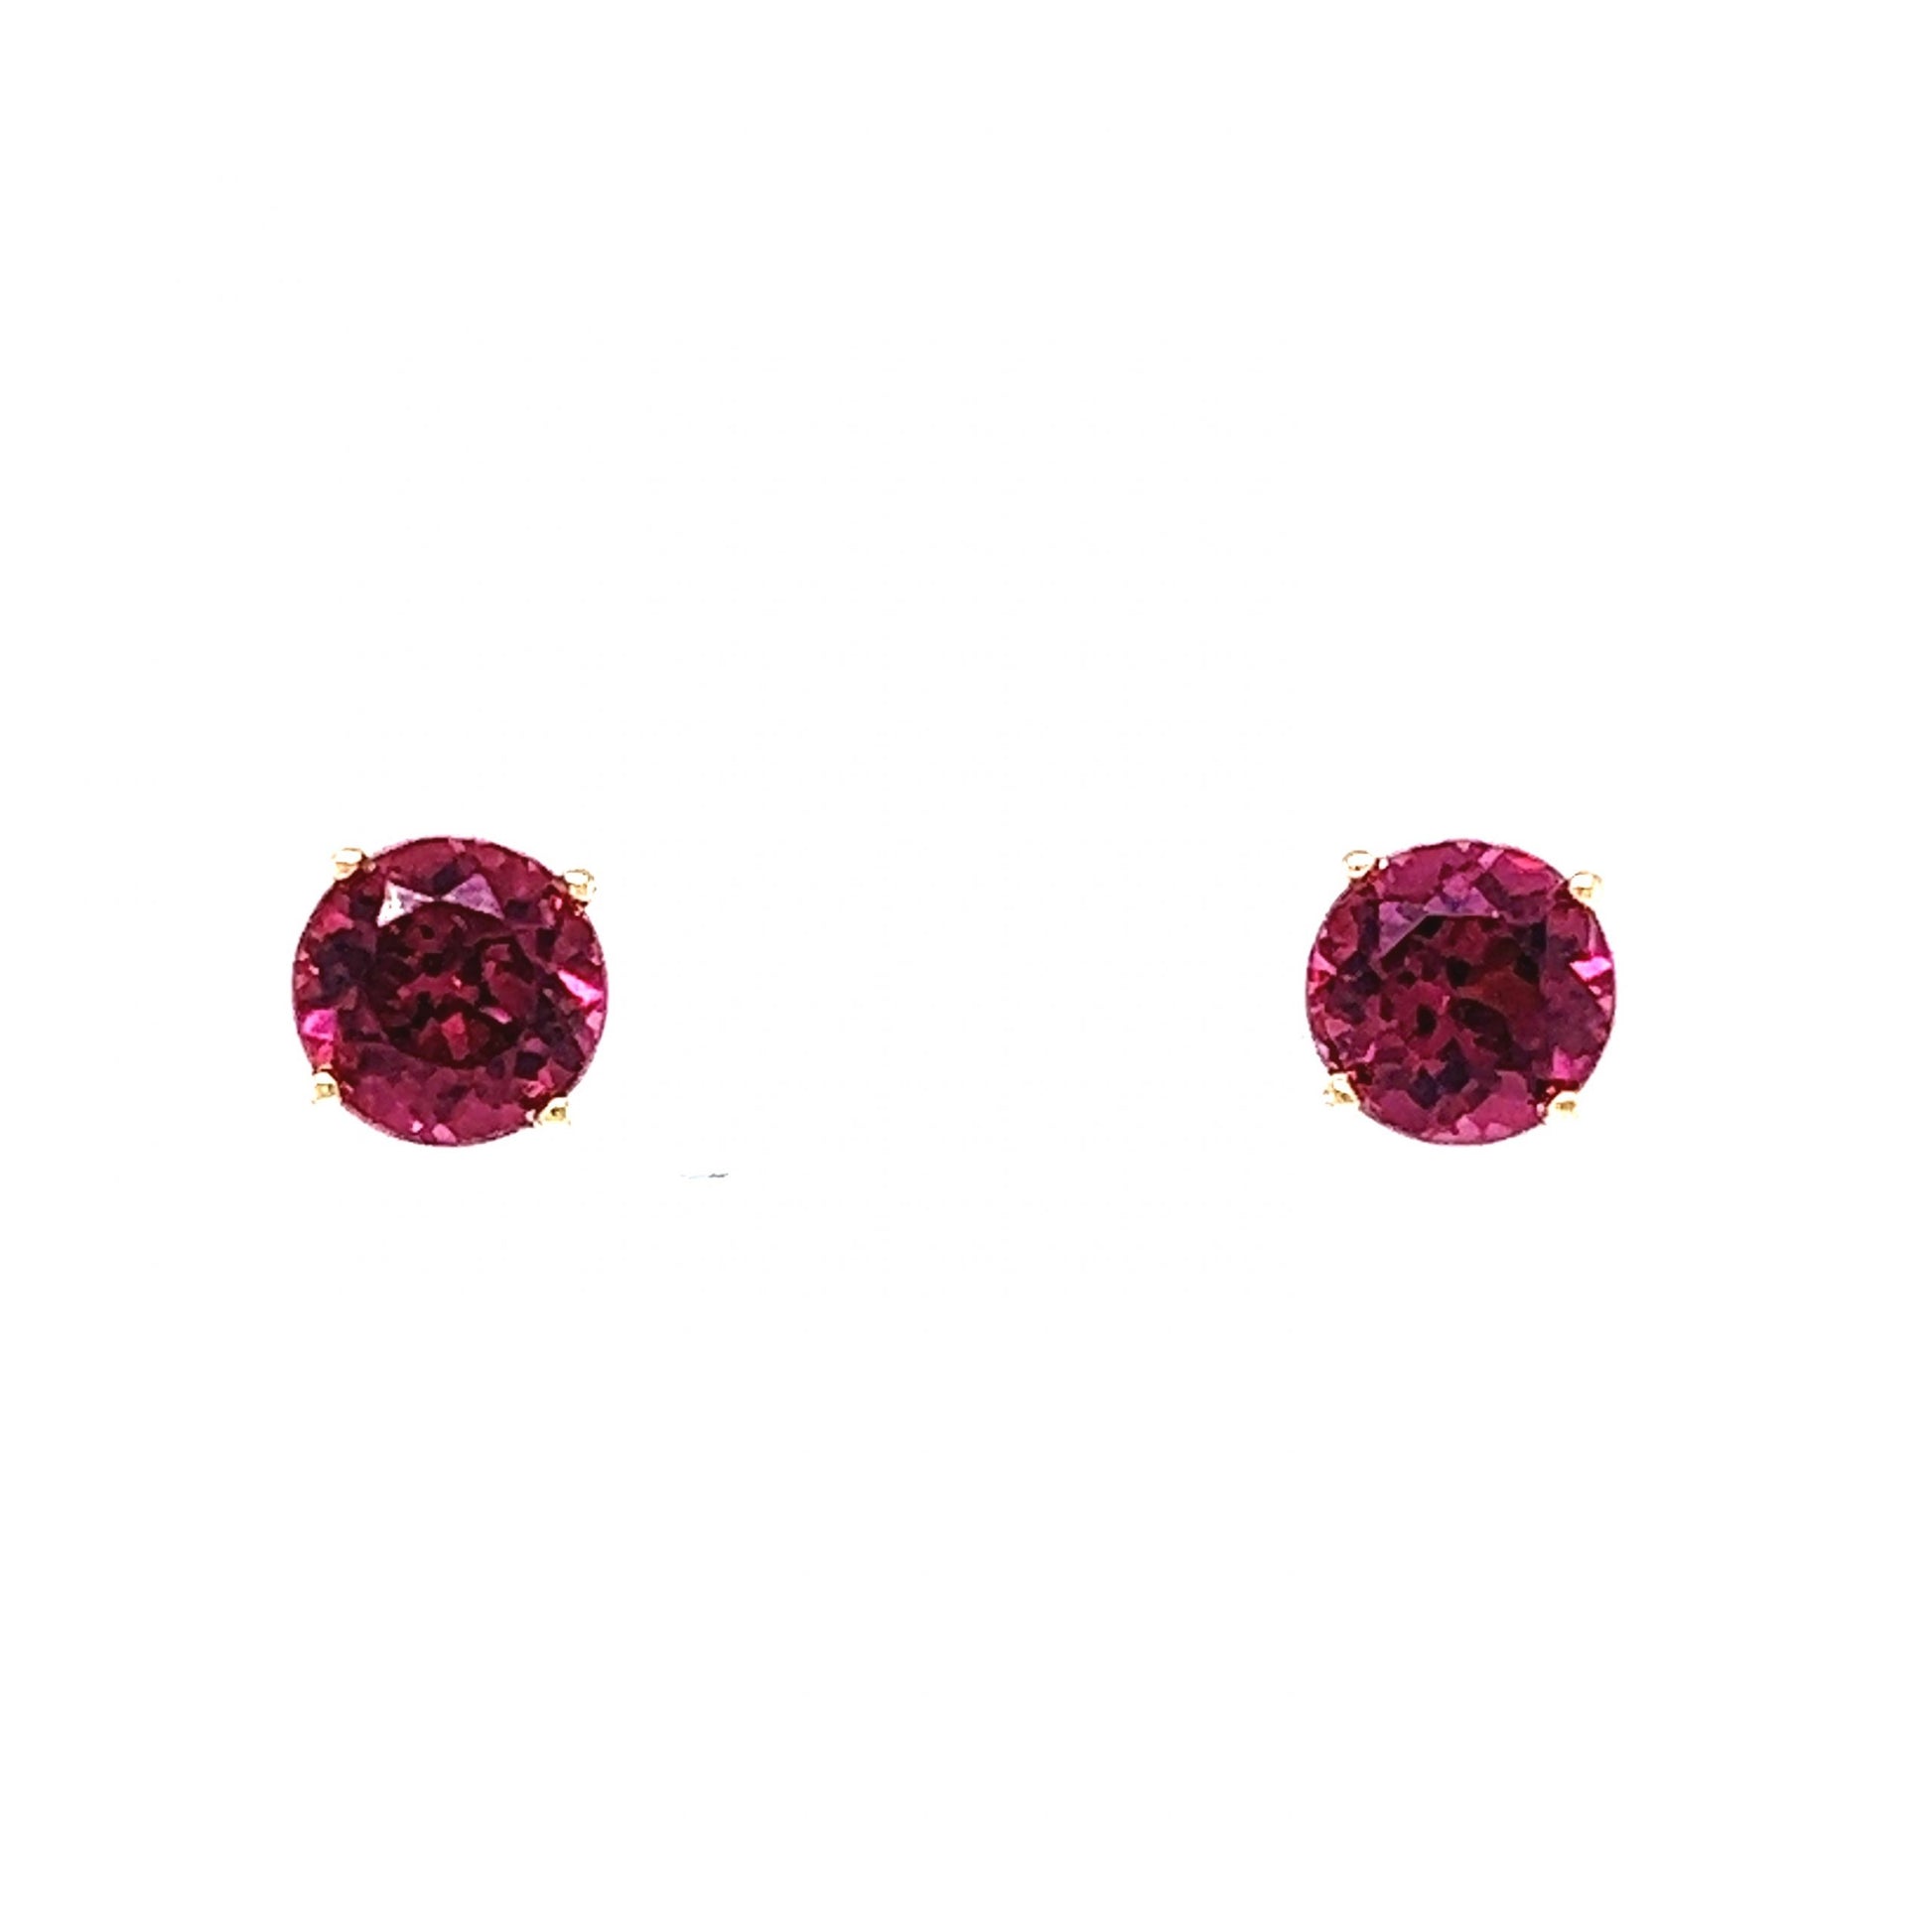 Classic Round Cut Pink Tourmaline Earrings in 14k Yellow Gold